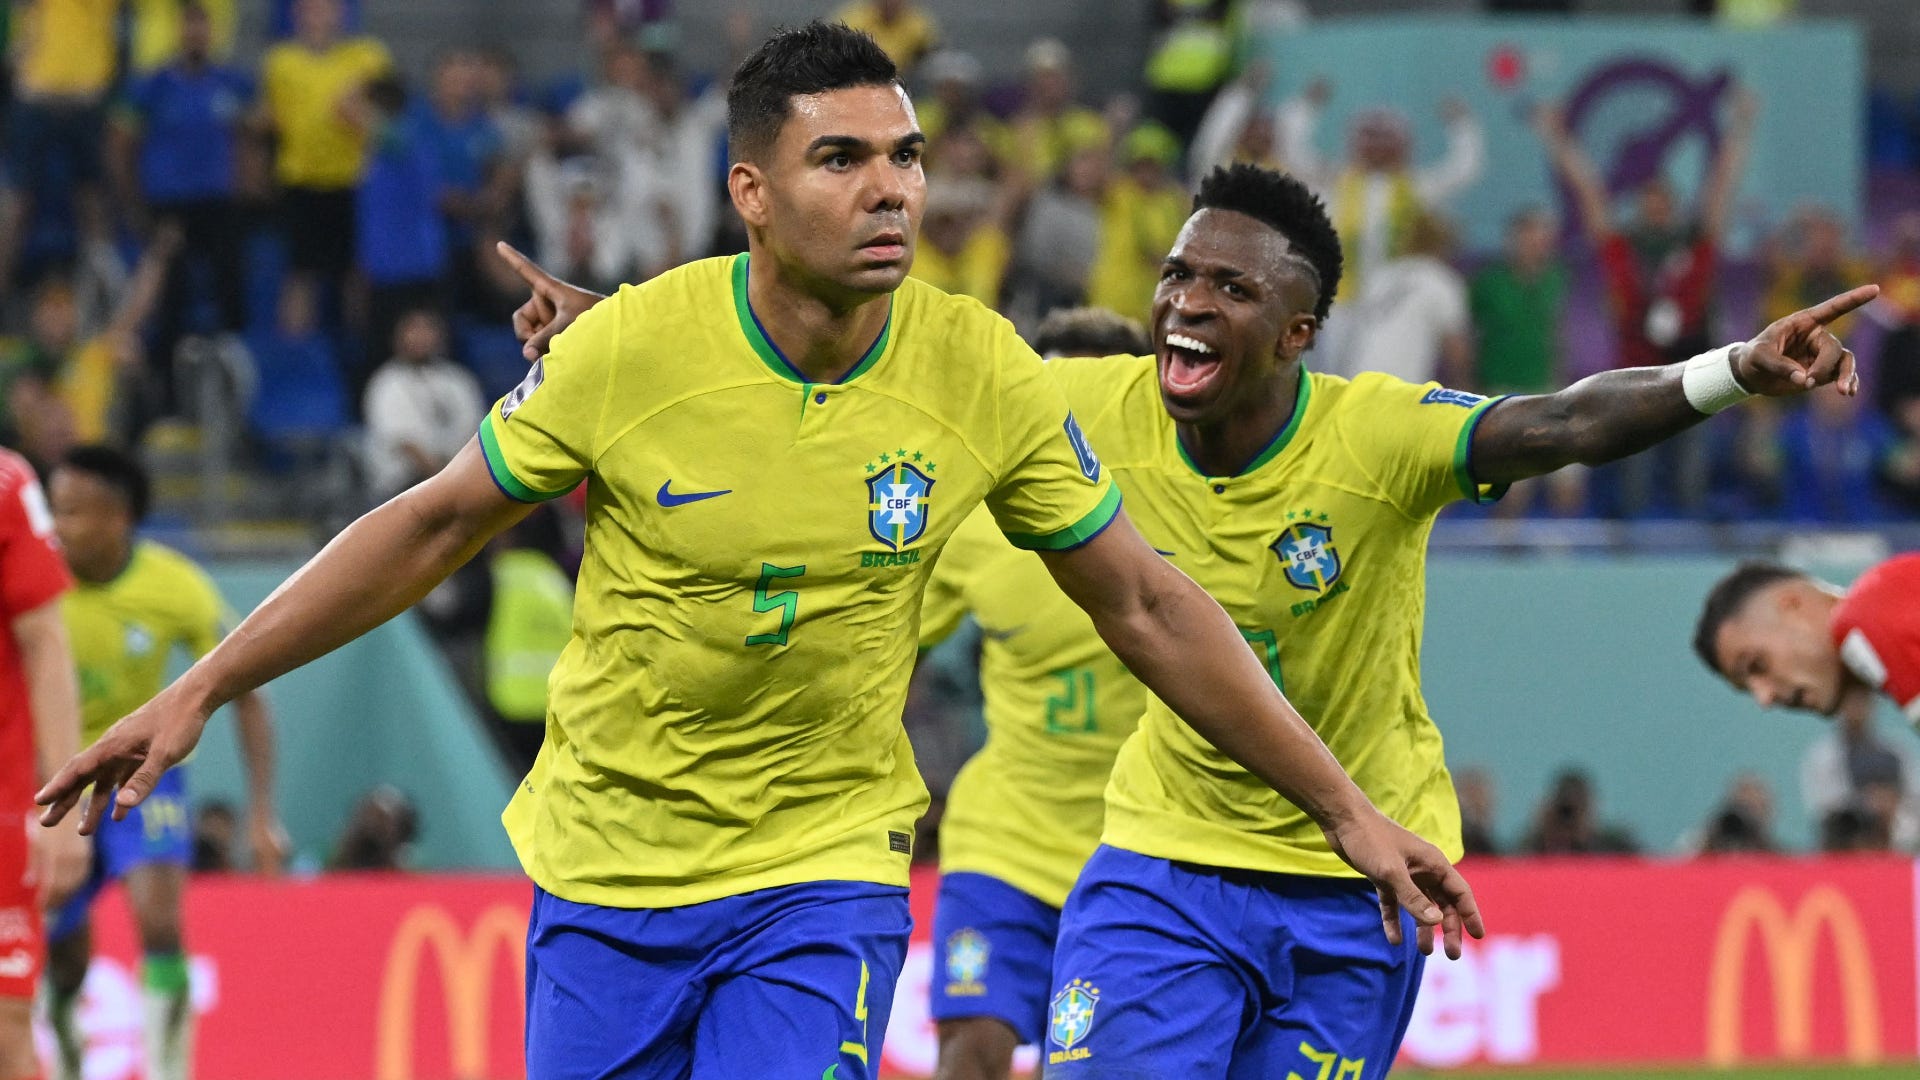 Cameroon vs Brazil Live stream, TV channel, kick-off time and where to watch Goal India